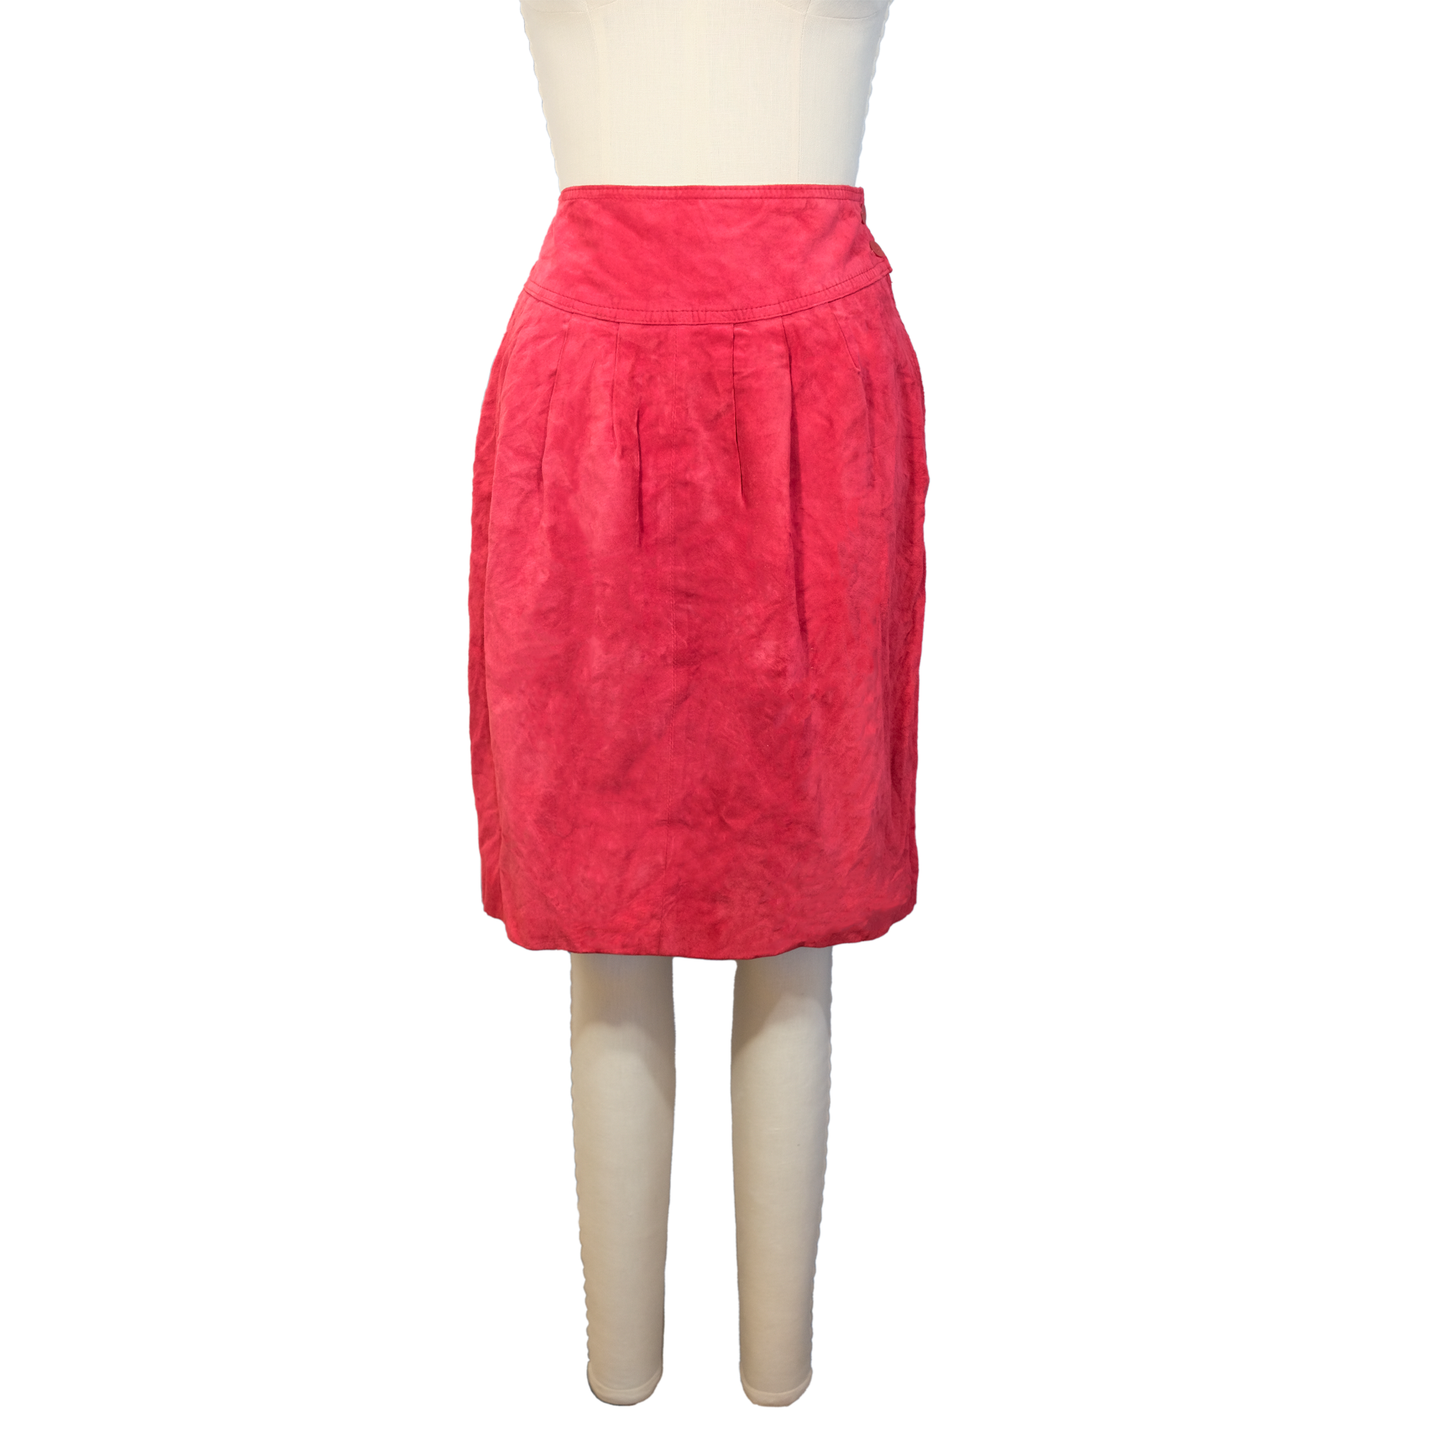 Vintage Lord and Taylor Red Pig Suede Skirt - Size 8